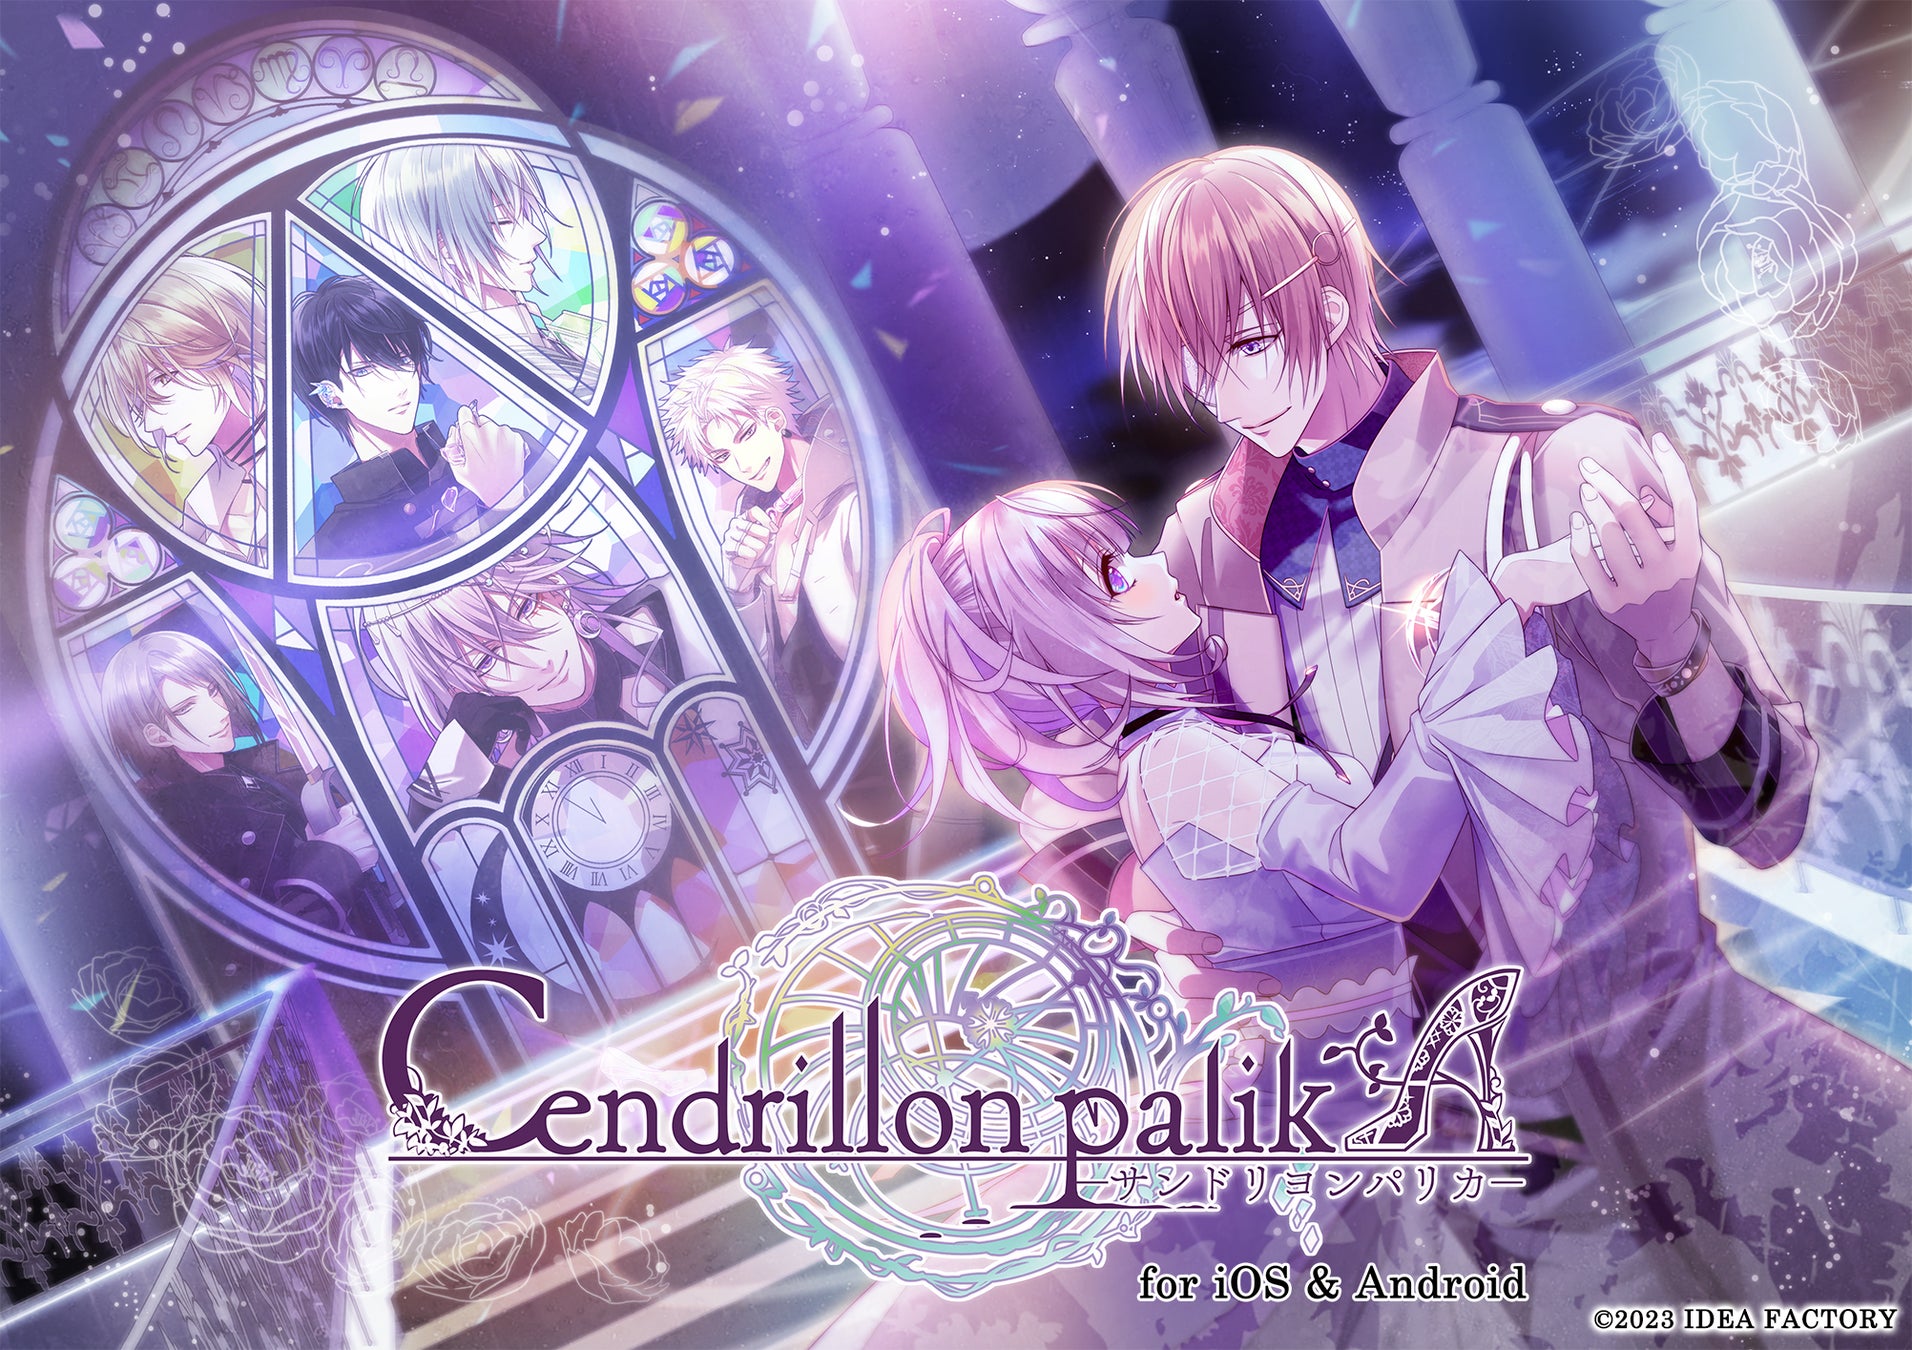 「Cendrillon palikA for iOS & Android」配信開始